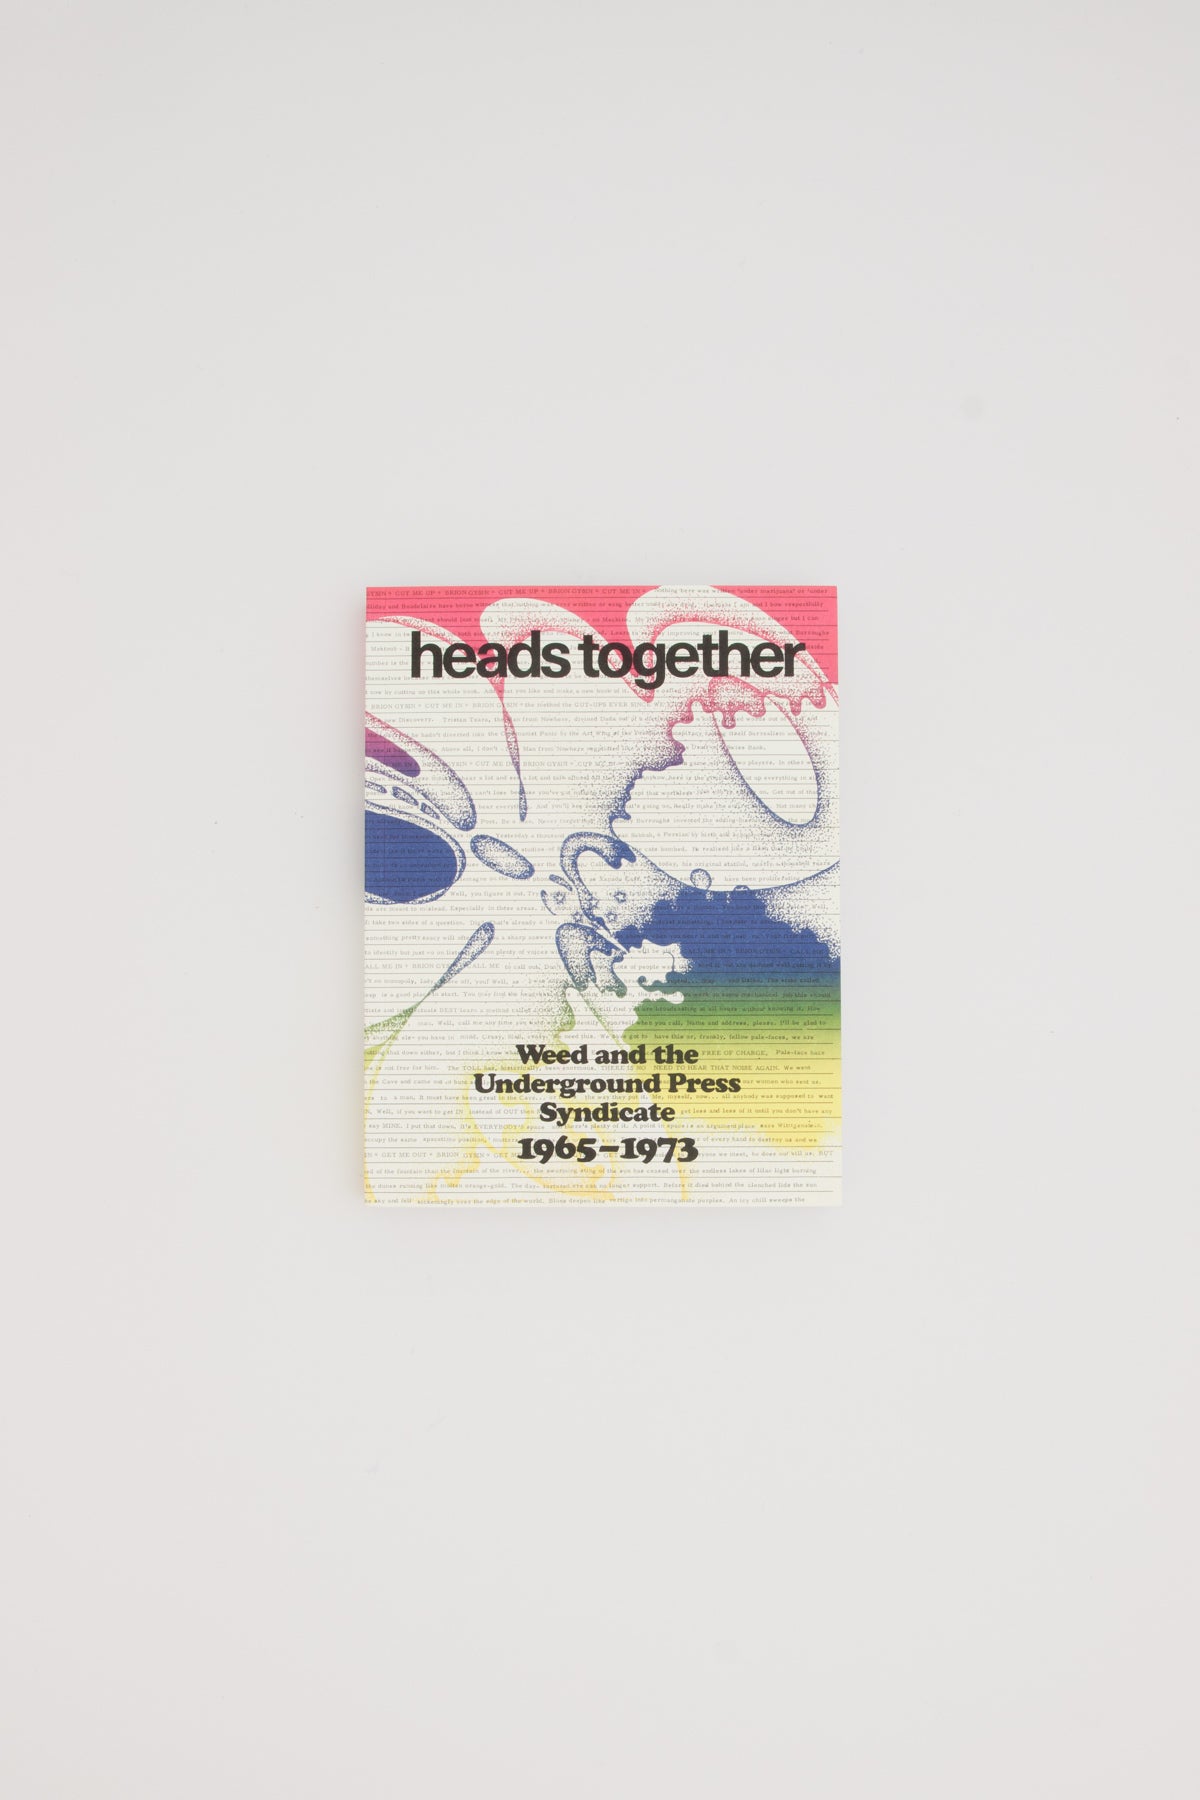 Heads Together. Weed and the Underground Press Syndicate 1965-1973. - David Jacob Kramer